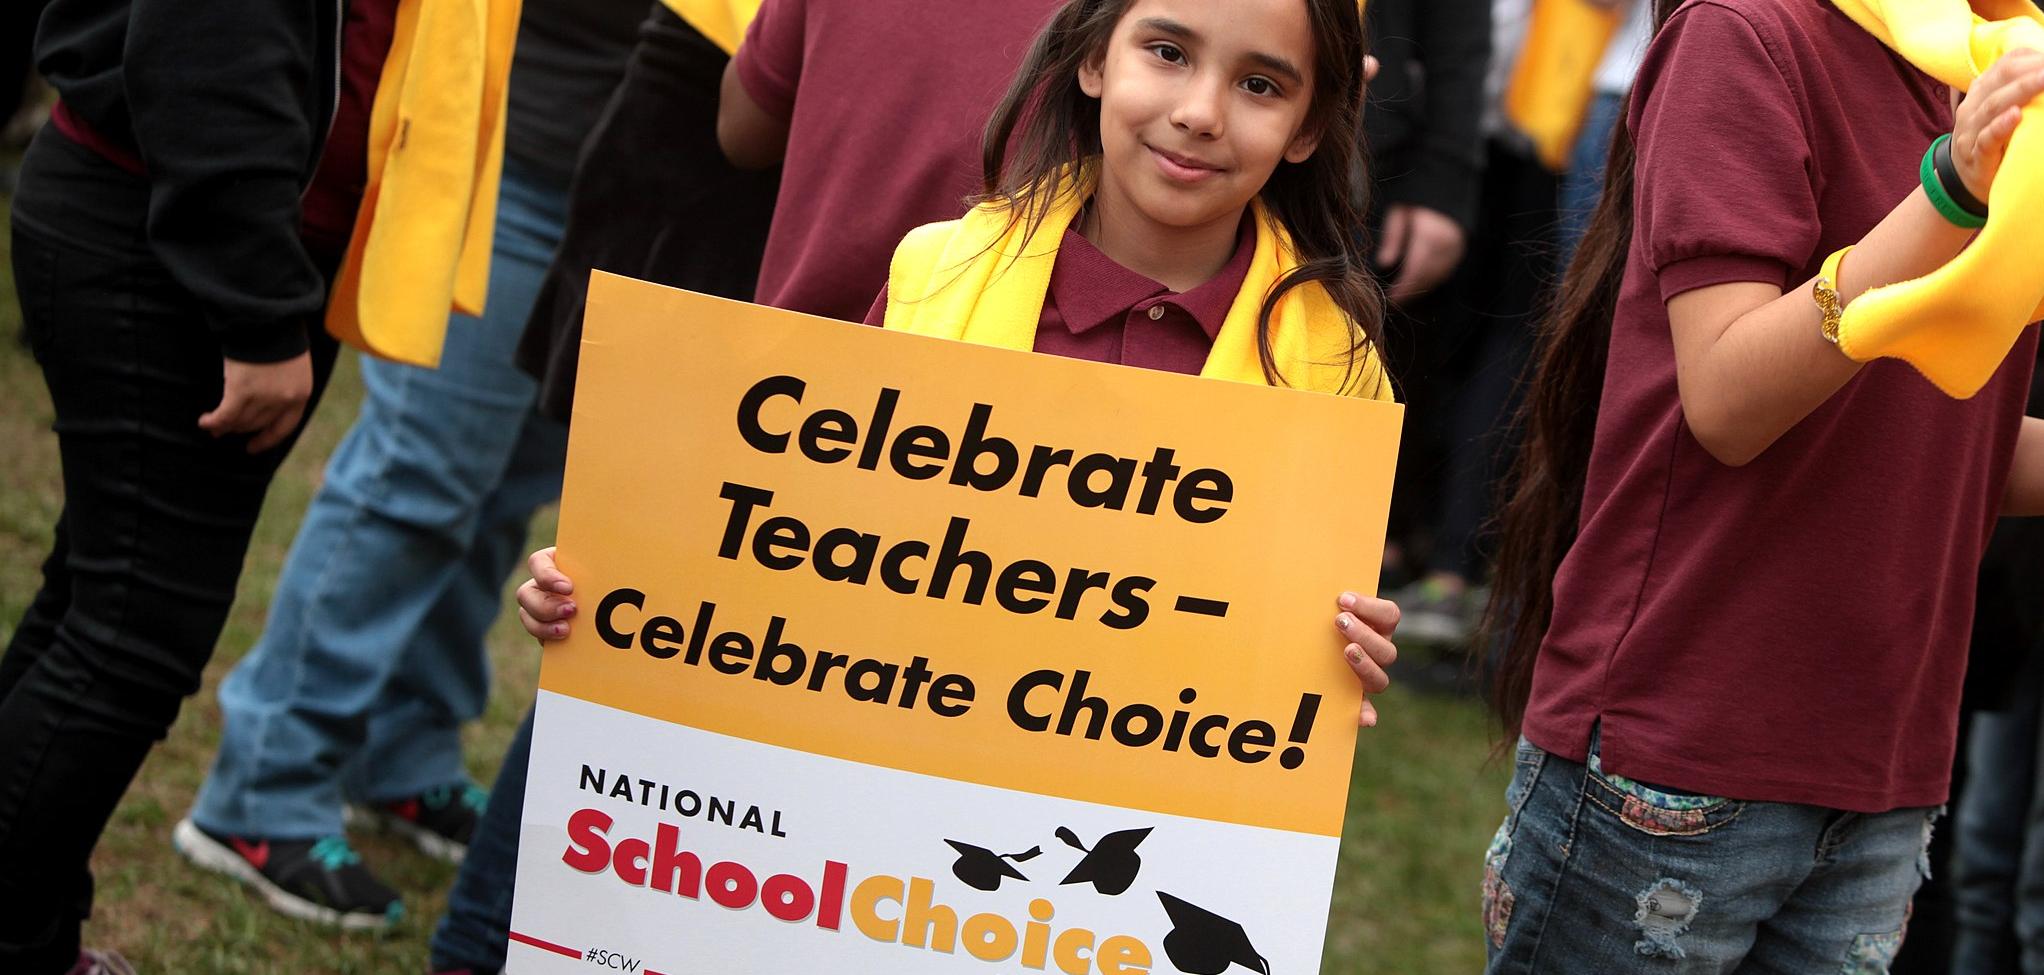 A young girl holding a sign that says Celebrate Teachers - Celebrate Choice! National School Choice Week